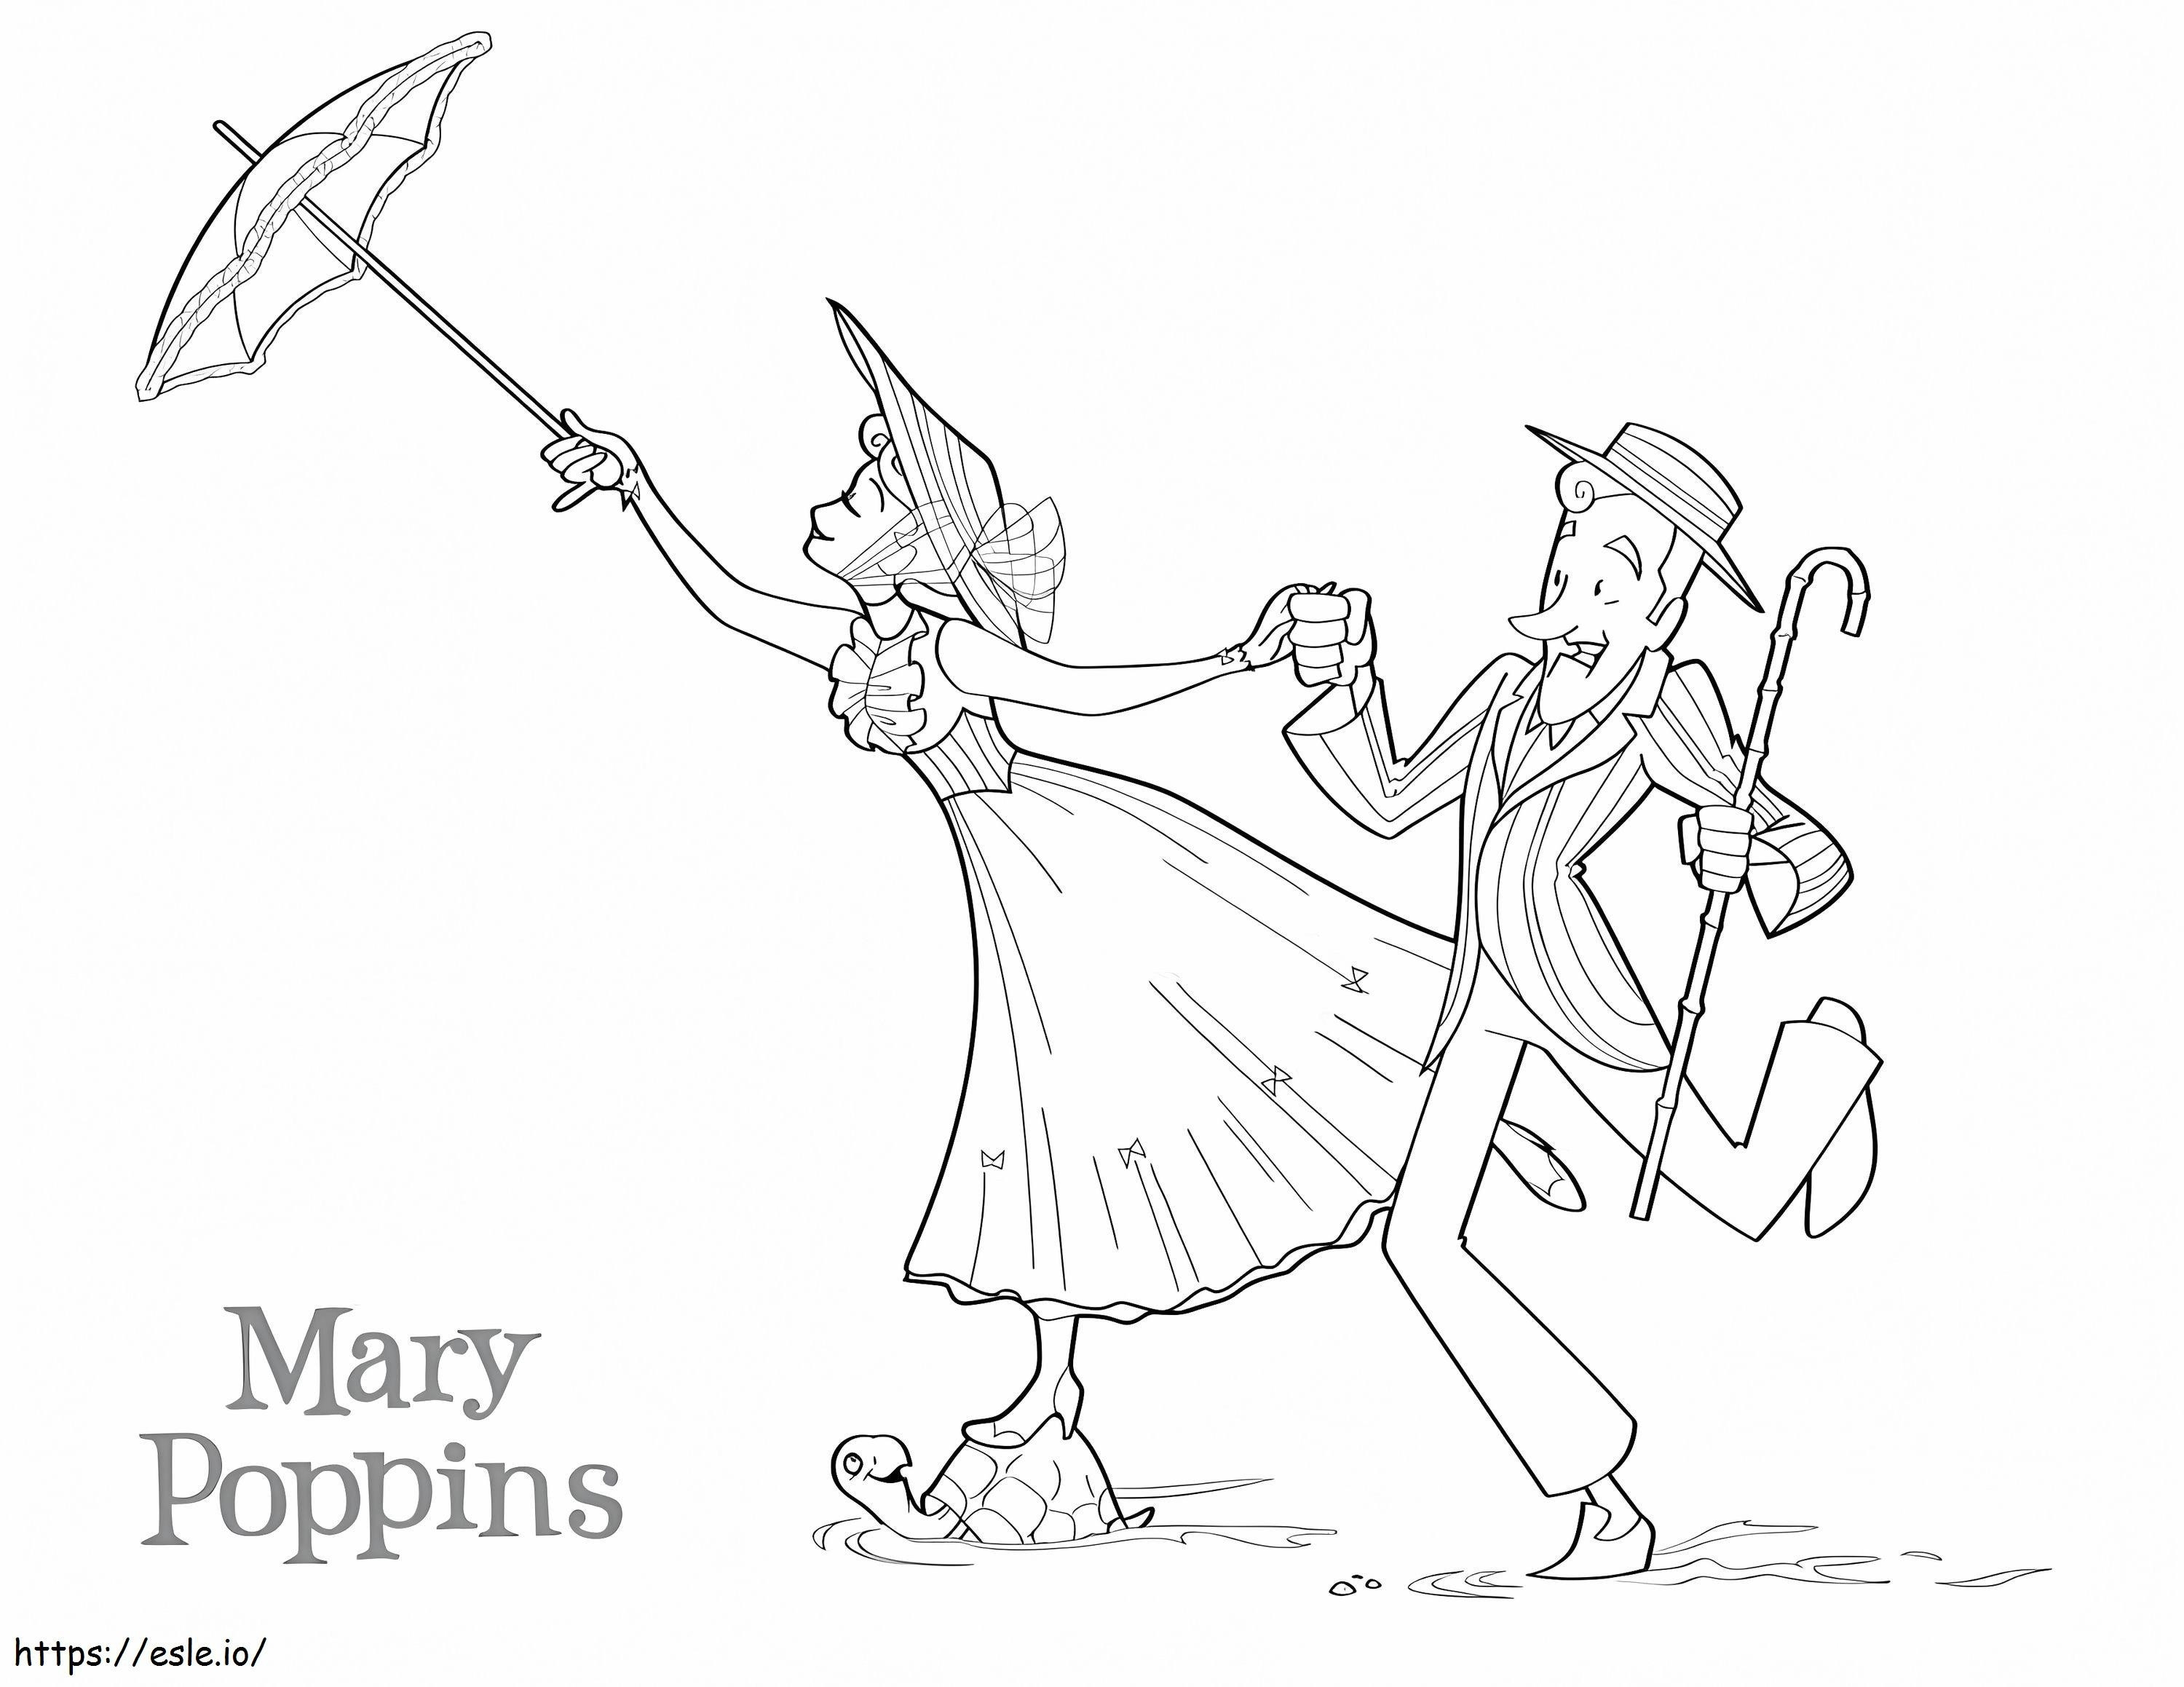 Mary Poppins Animation coloring page